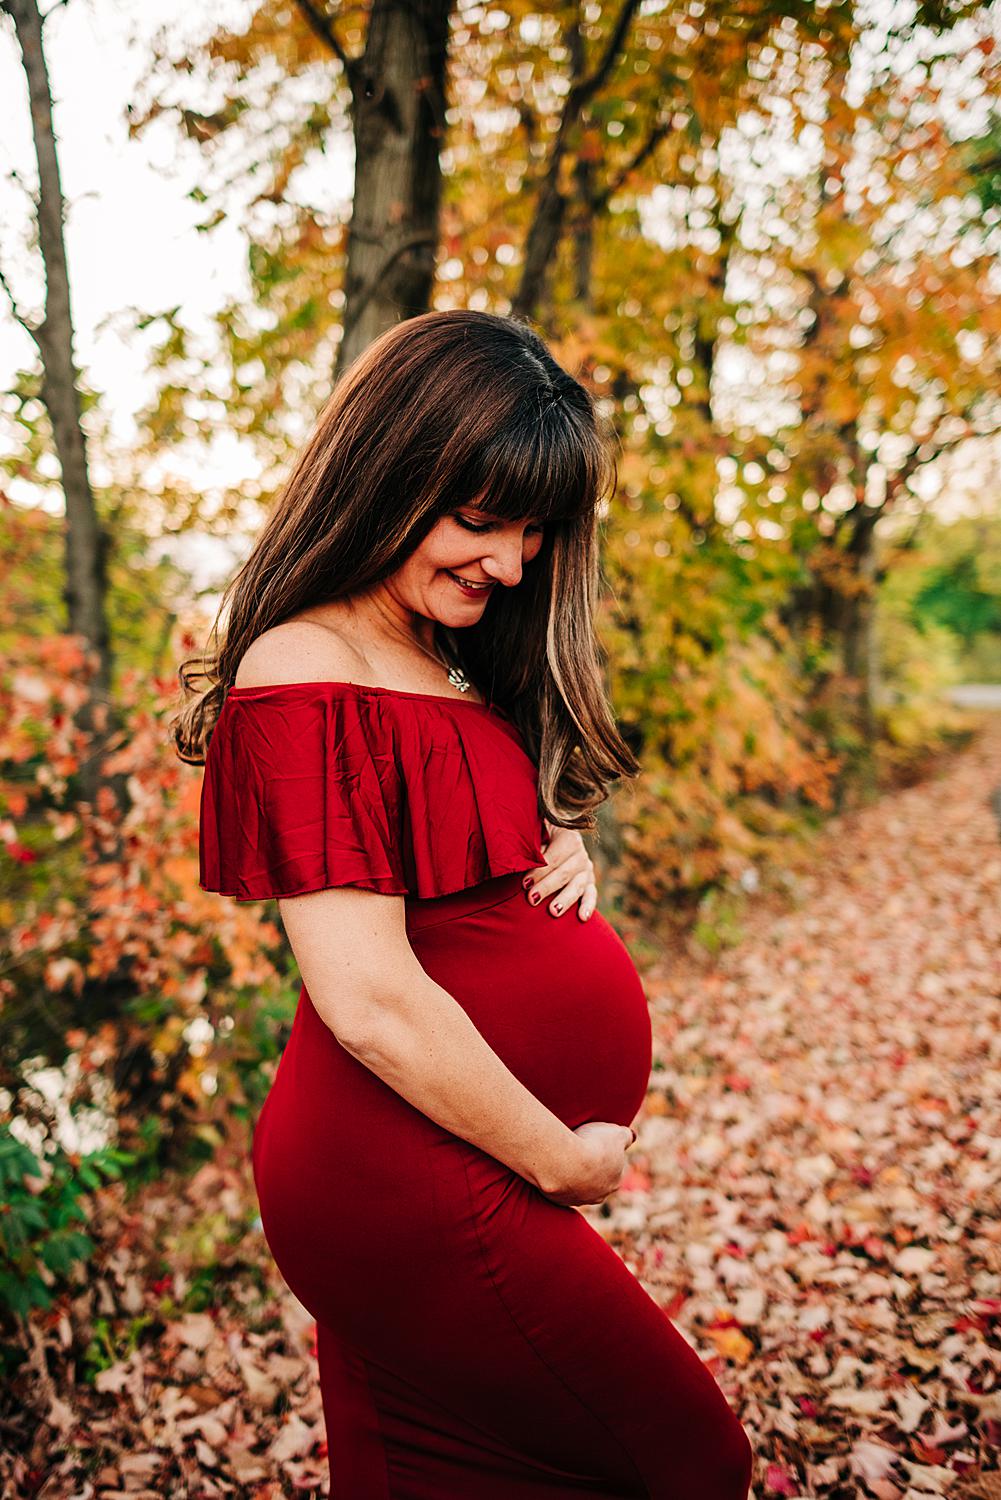 Columbus Maternity photographer documents expectant mom's growing belly